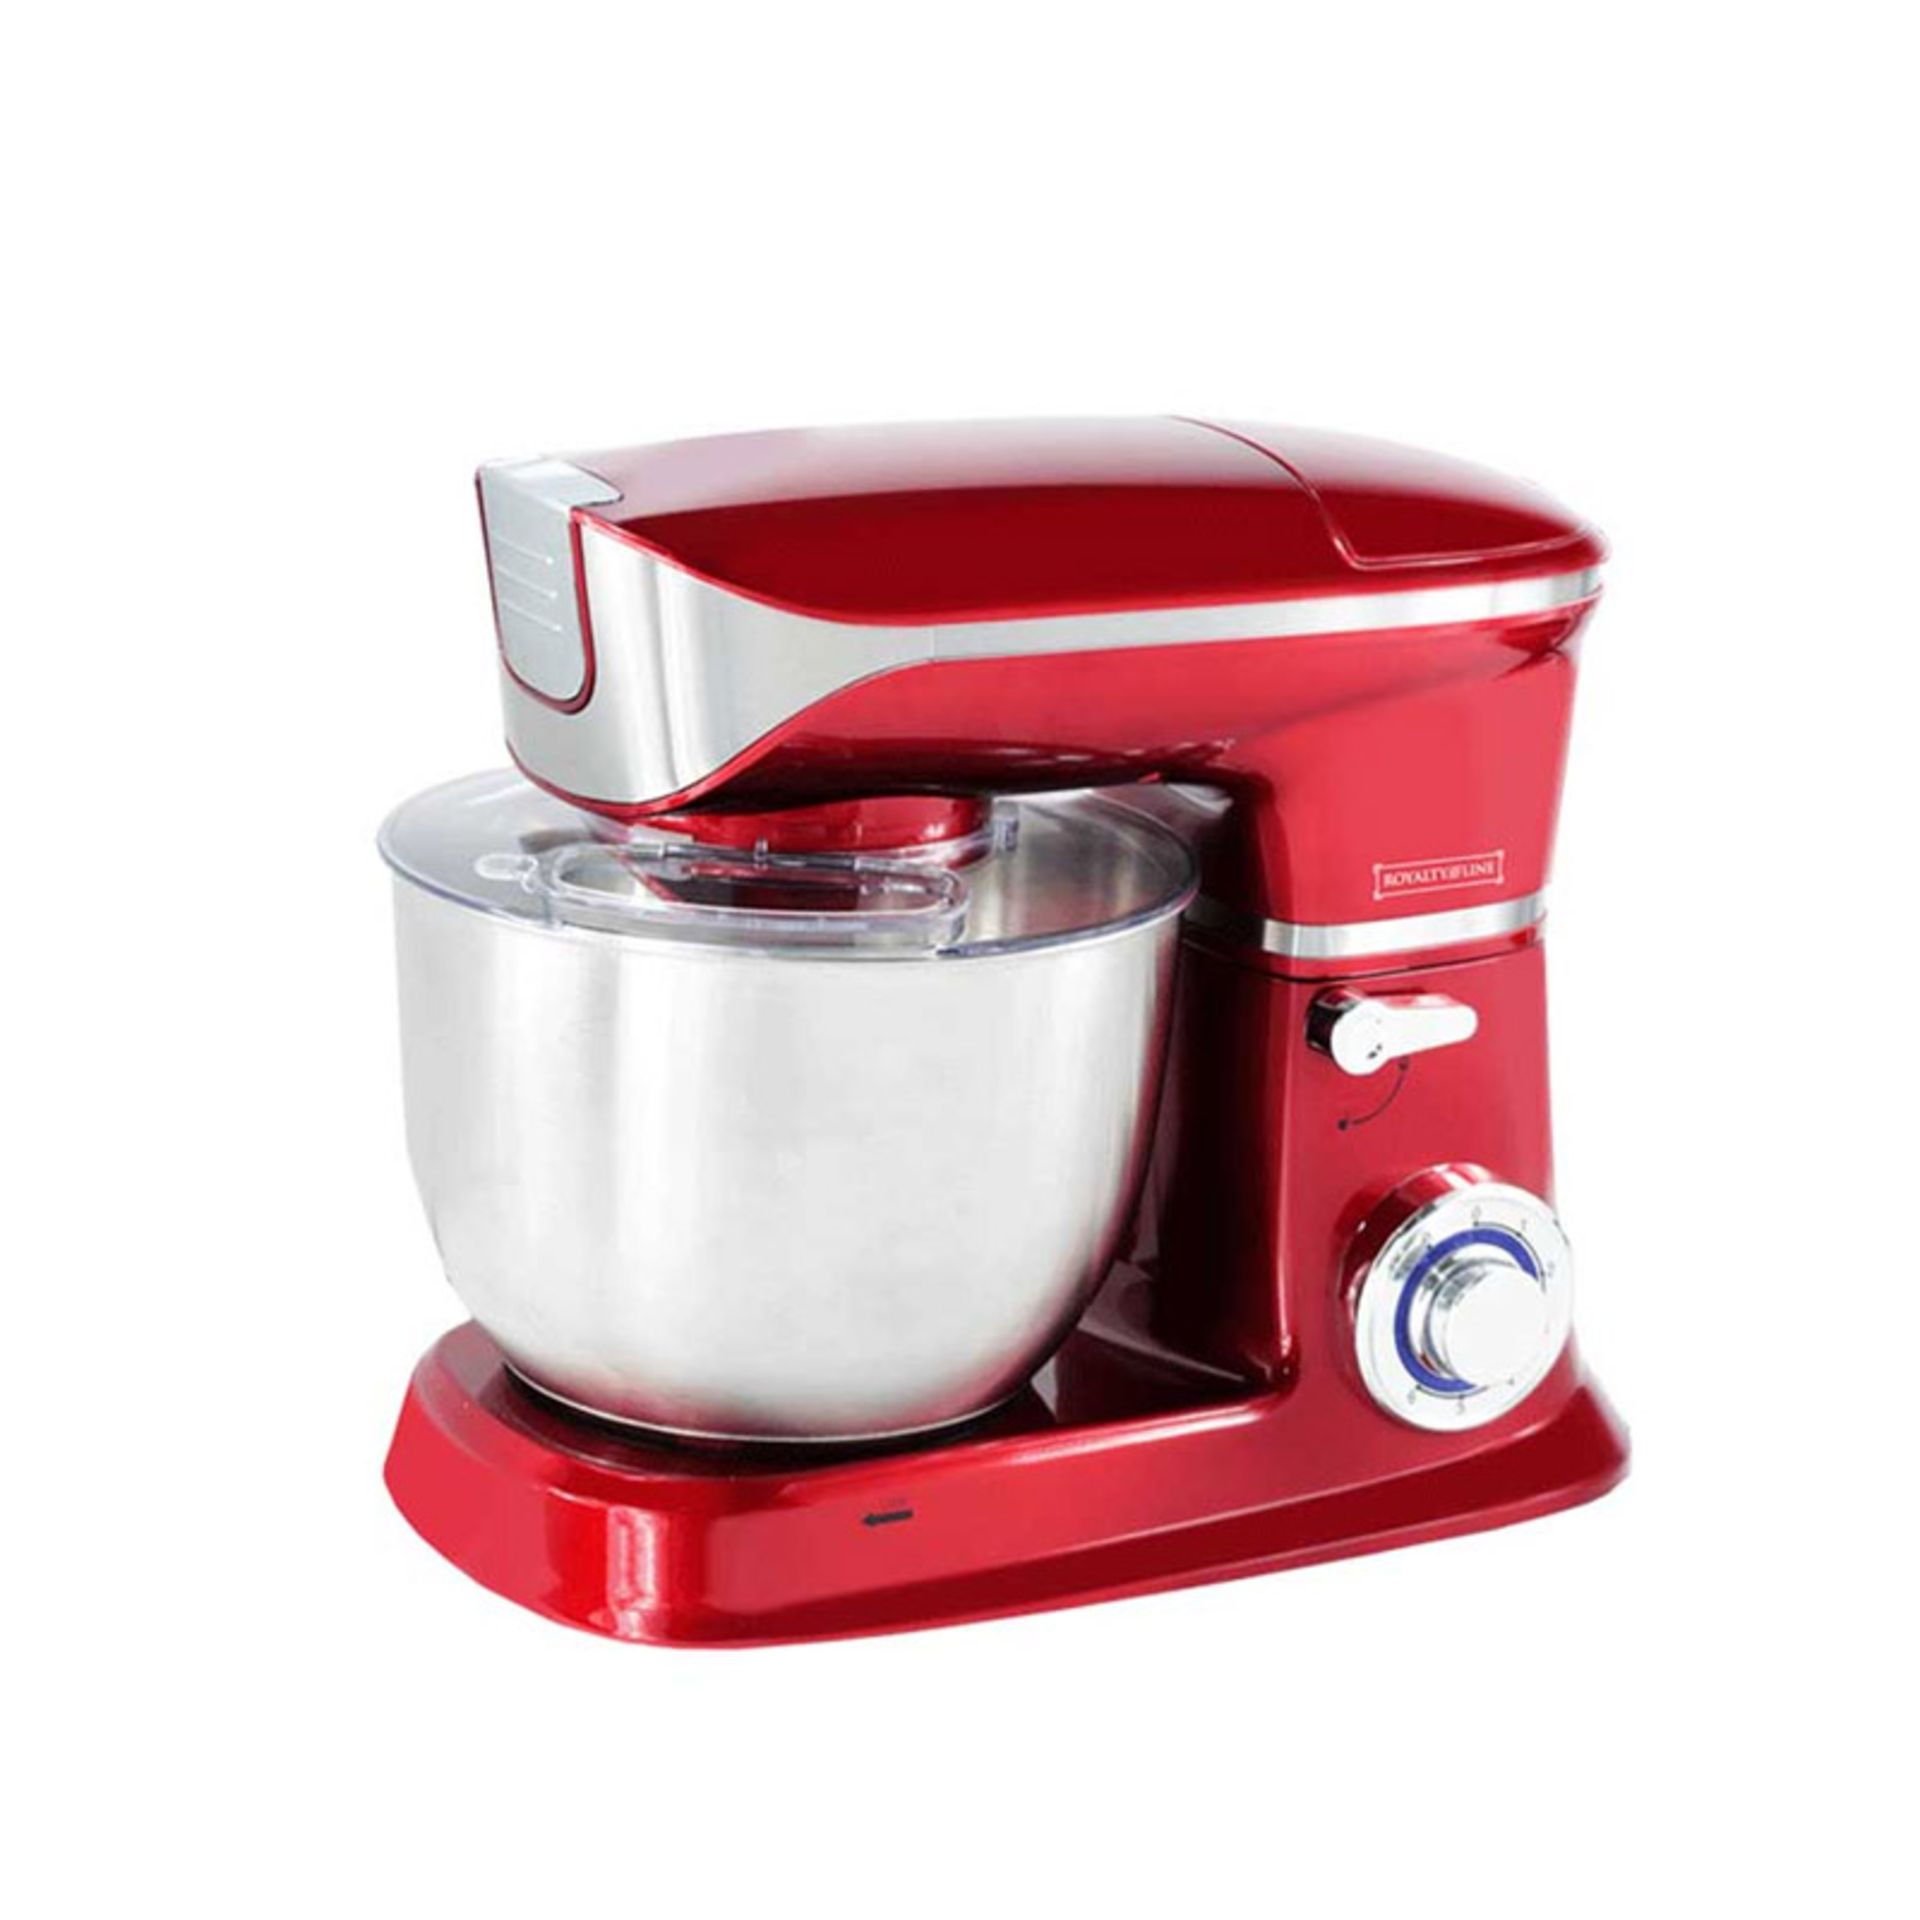 V Brand New Kitchen Food Mixer - 1900W - 6 Speed - Stainless Steel 6.5ltr bowl- Includes Dough